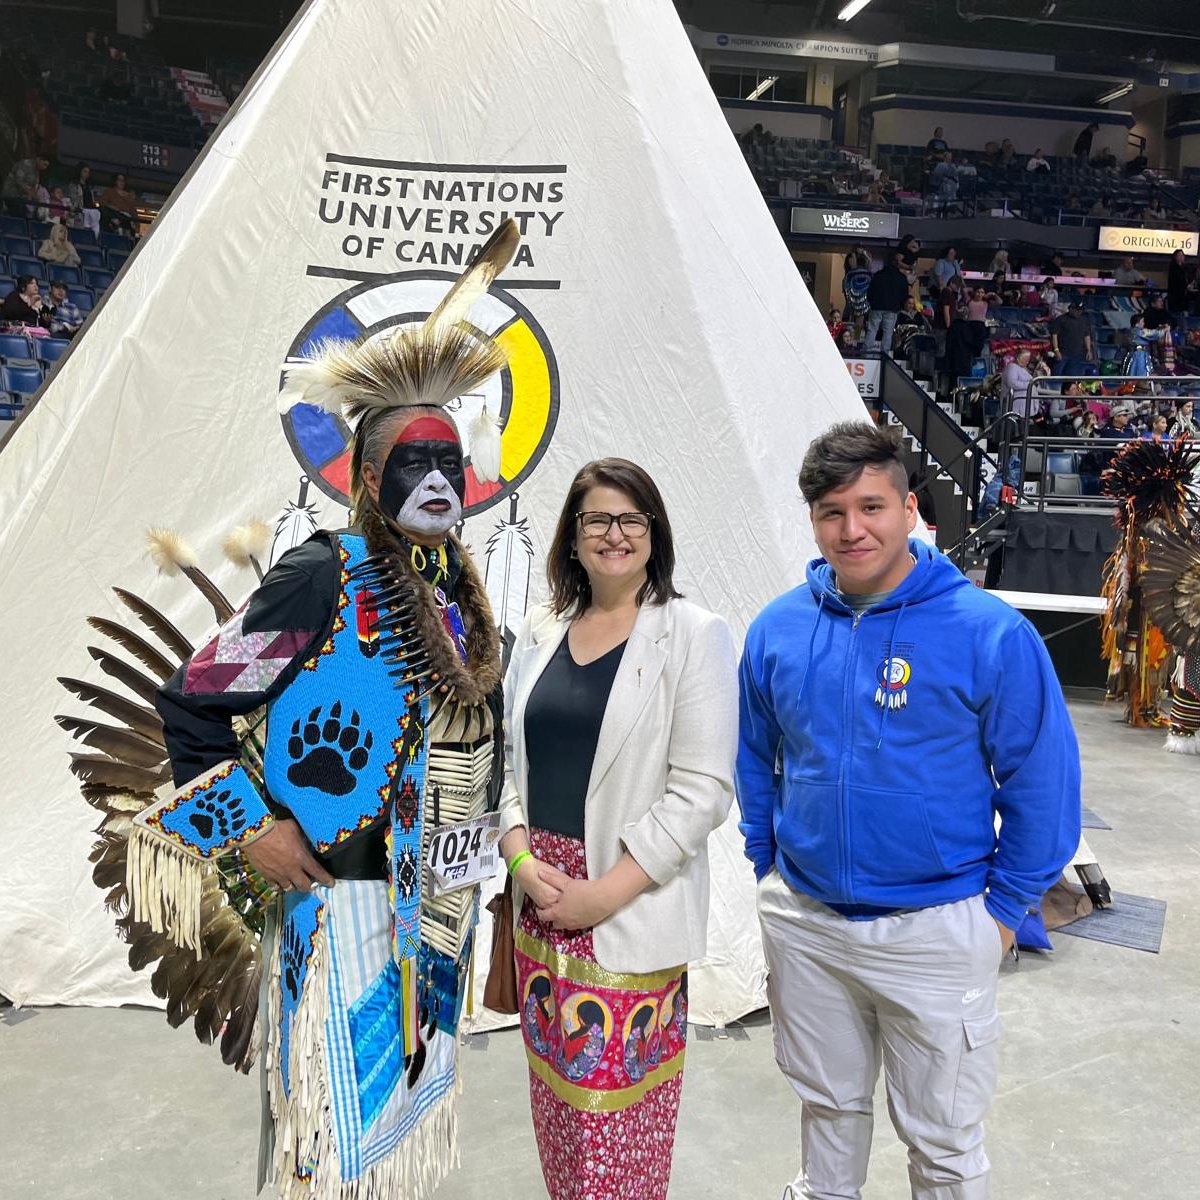 Phenomenal job thanks to all the hardworking, wonderful people on the @fnunivpowwow Committee, including Committee Chairwoman Cherish Jean-Baptiste — even with some setbacks, you all persevered and put on an amazing Spring Celebration Powwow — thank you so much!